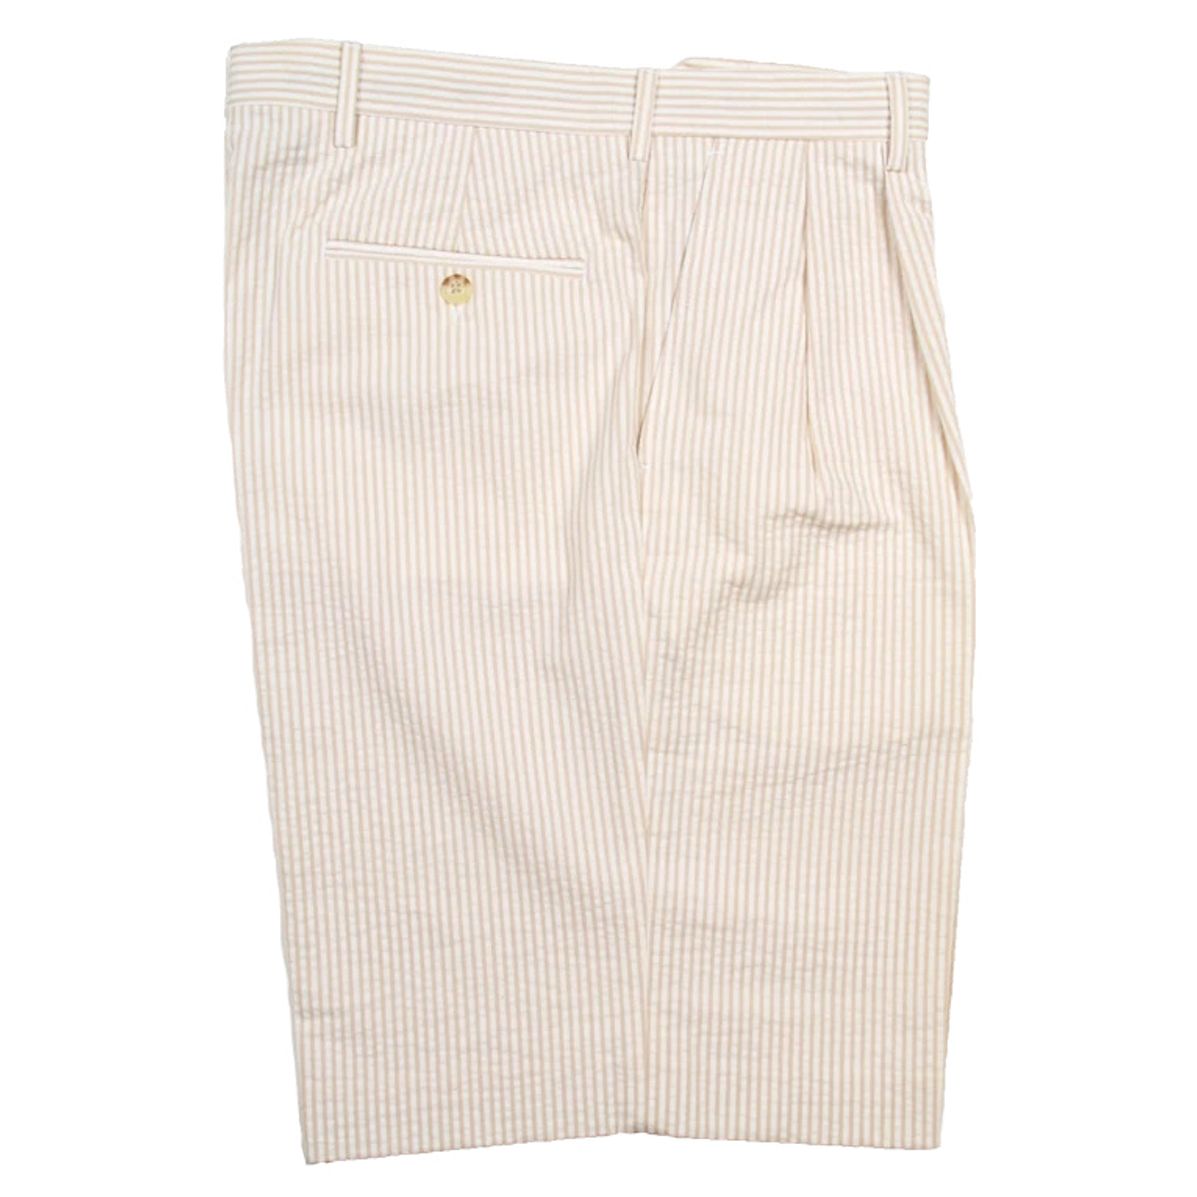 Seersucker Pleated Cotton Short in Tan and White (Ascot Double Reverse Pleat) by Berle